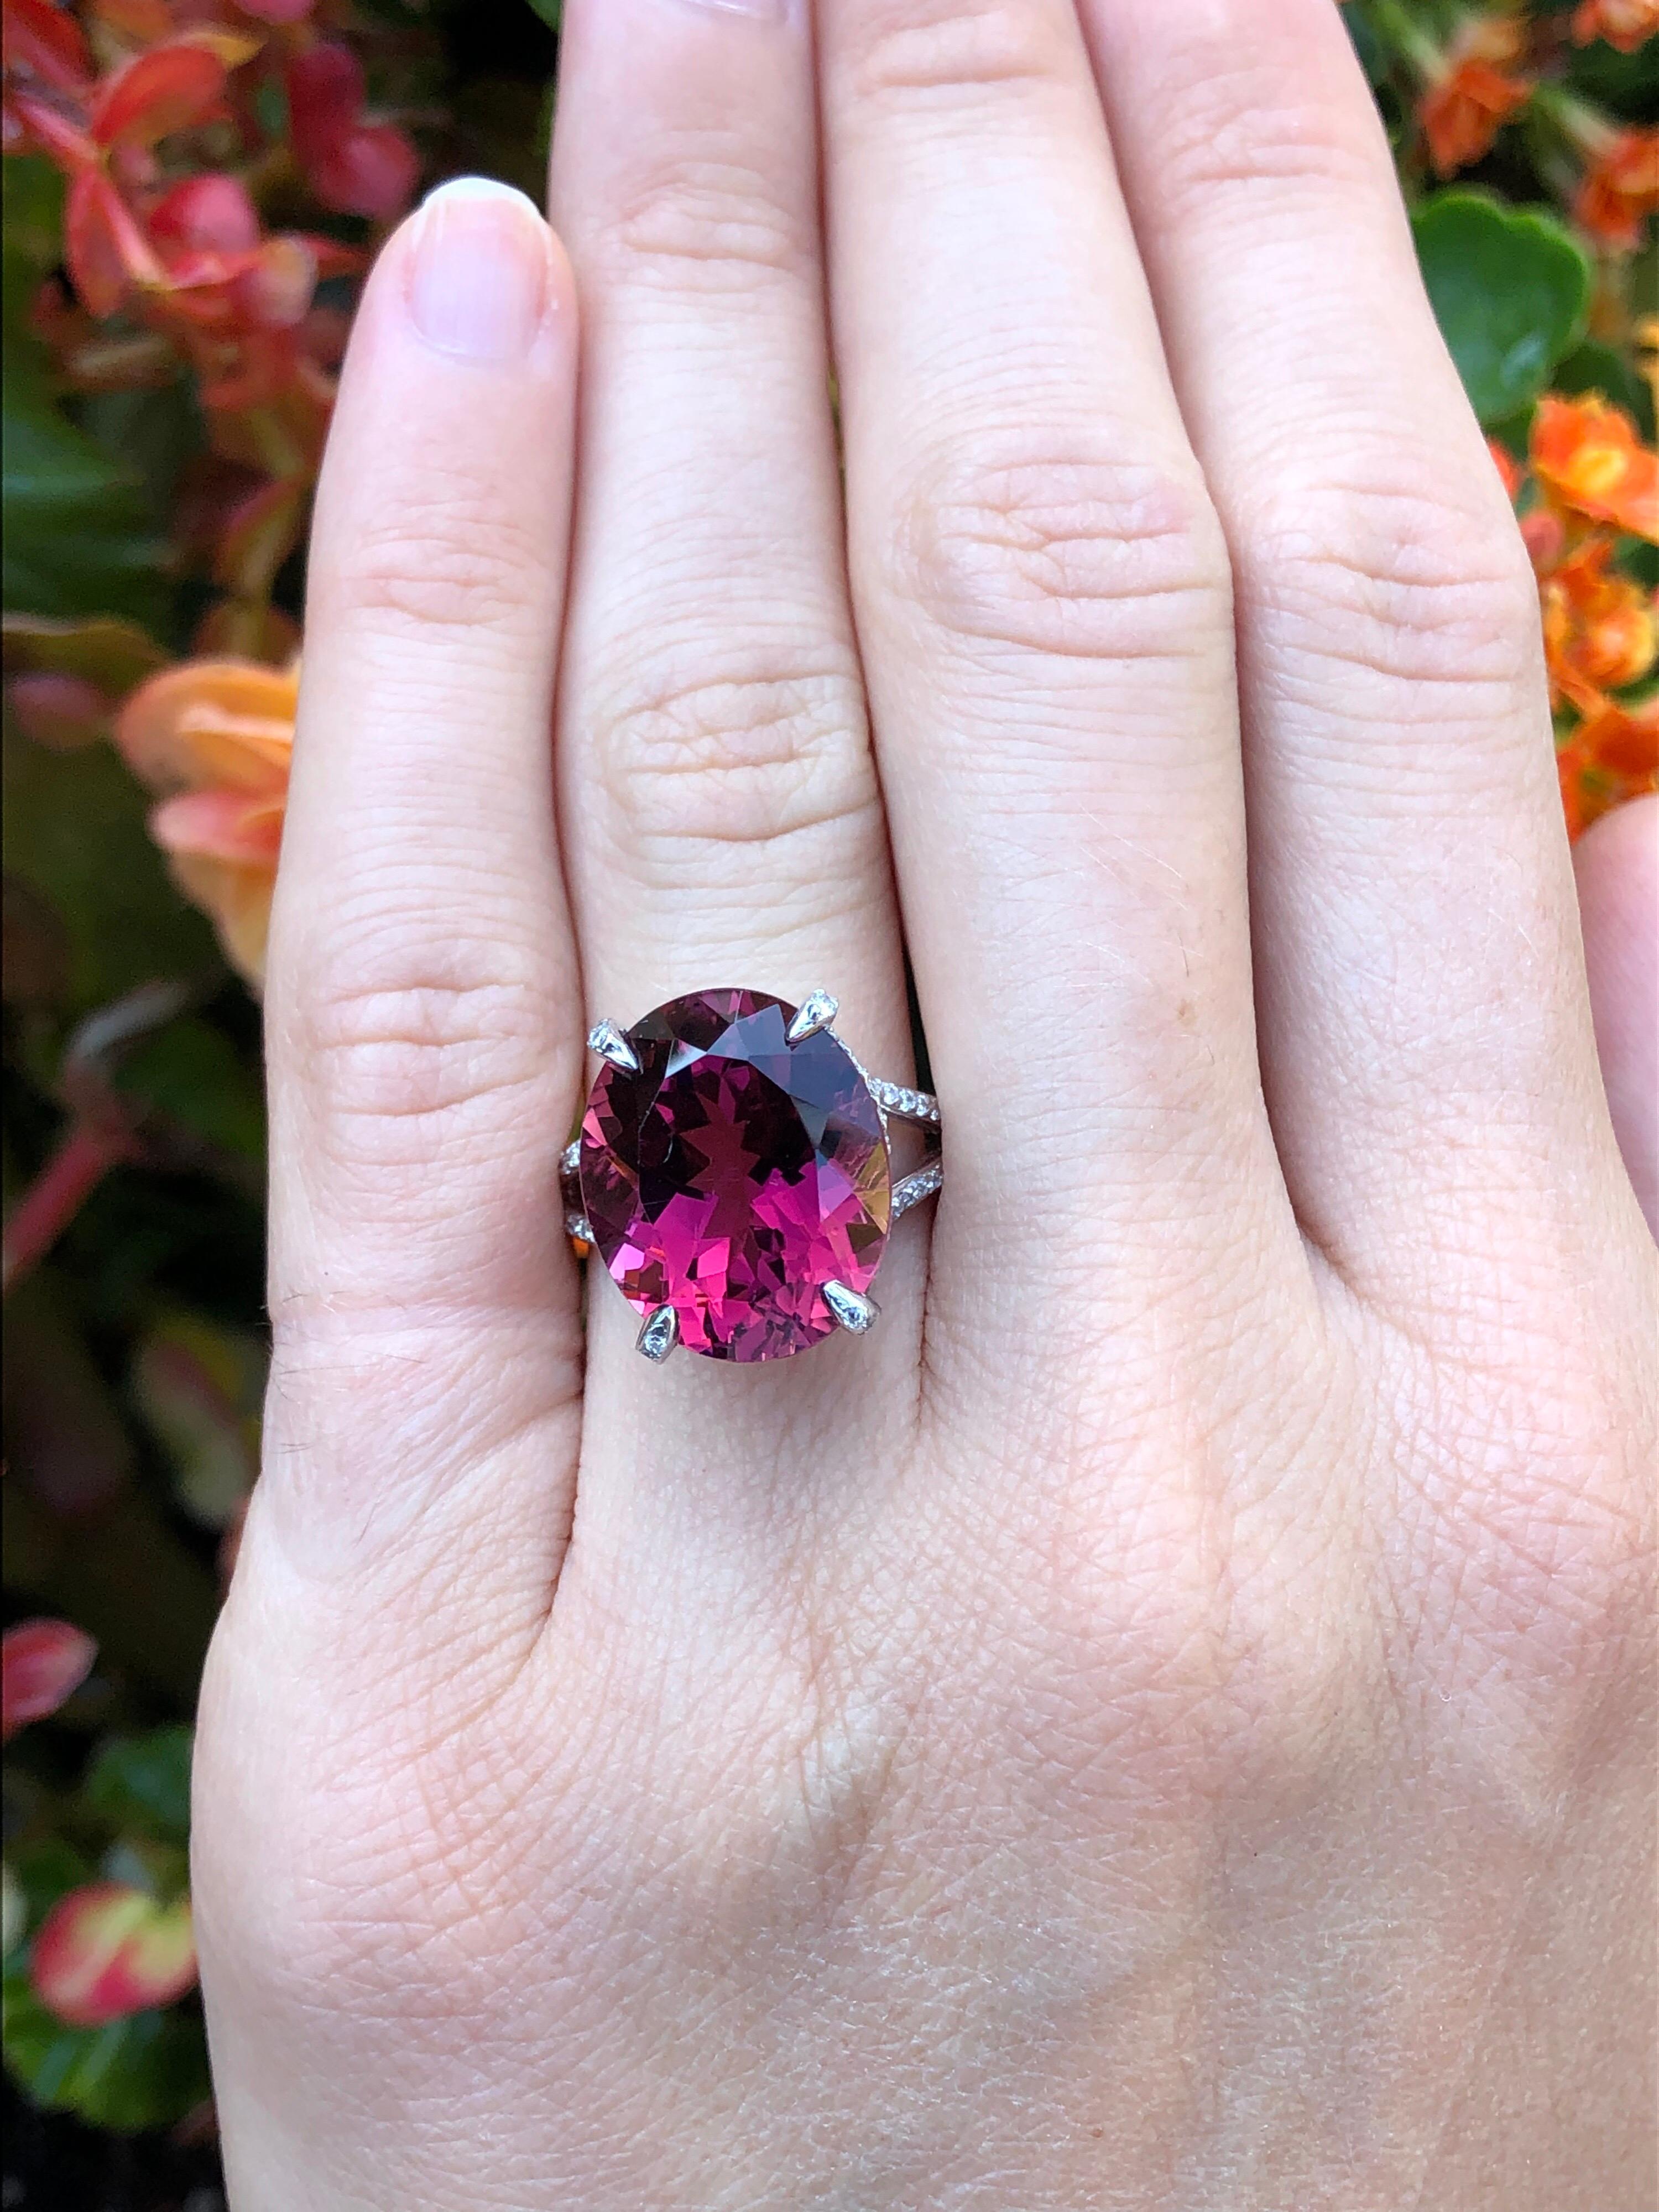 Oval Cut Rubellite Tourmaline Ring 11.90 Carats Oval